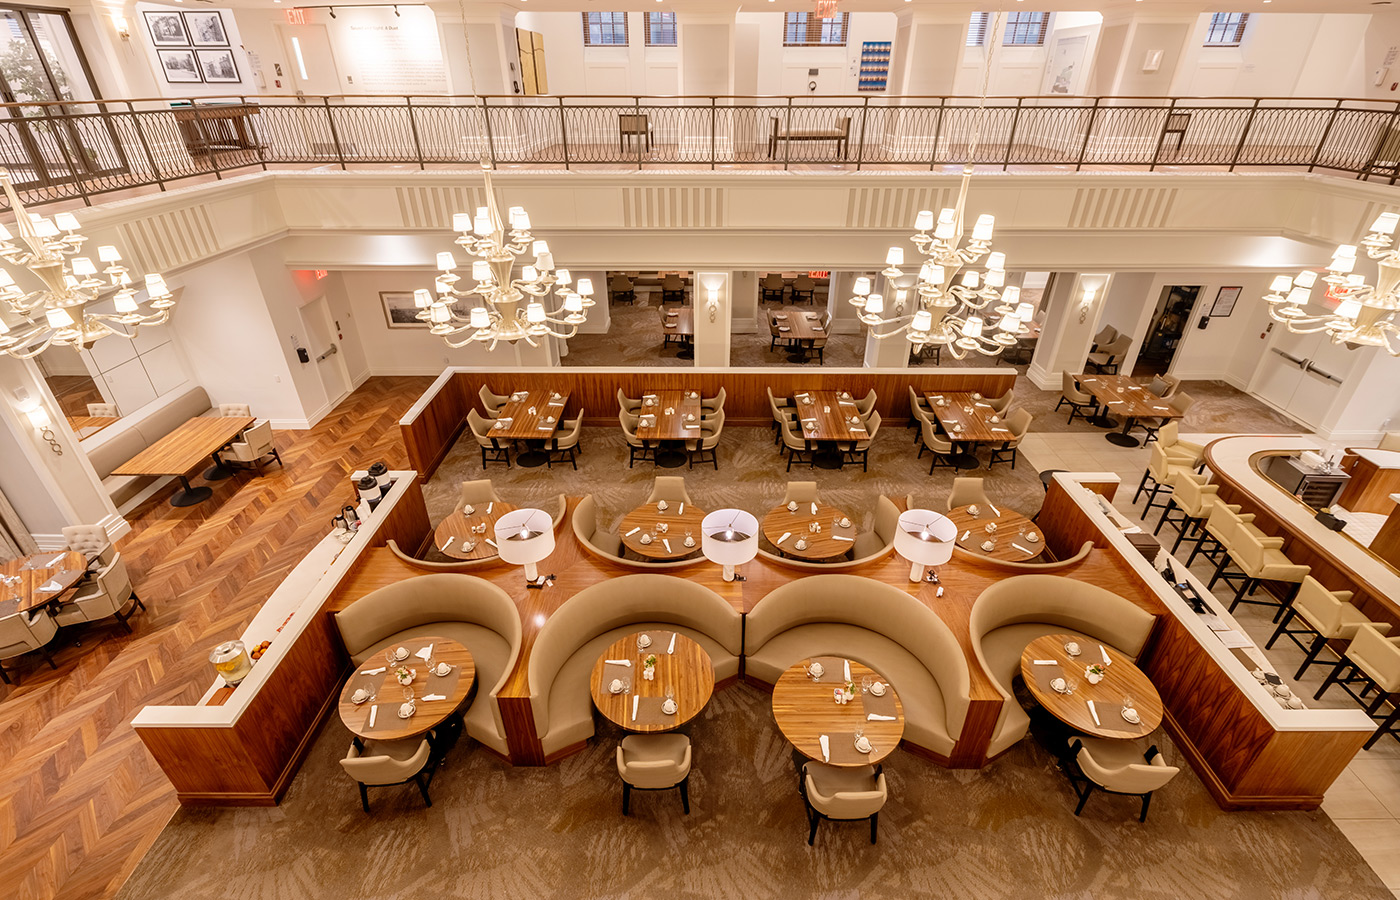 An aerial view of the main dining room.